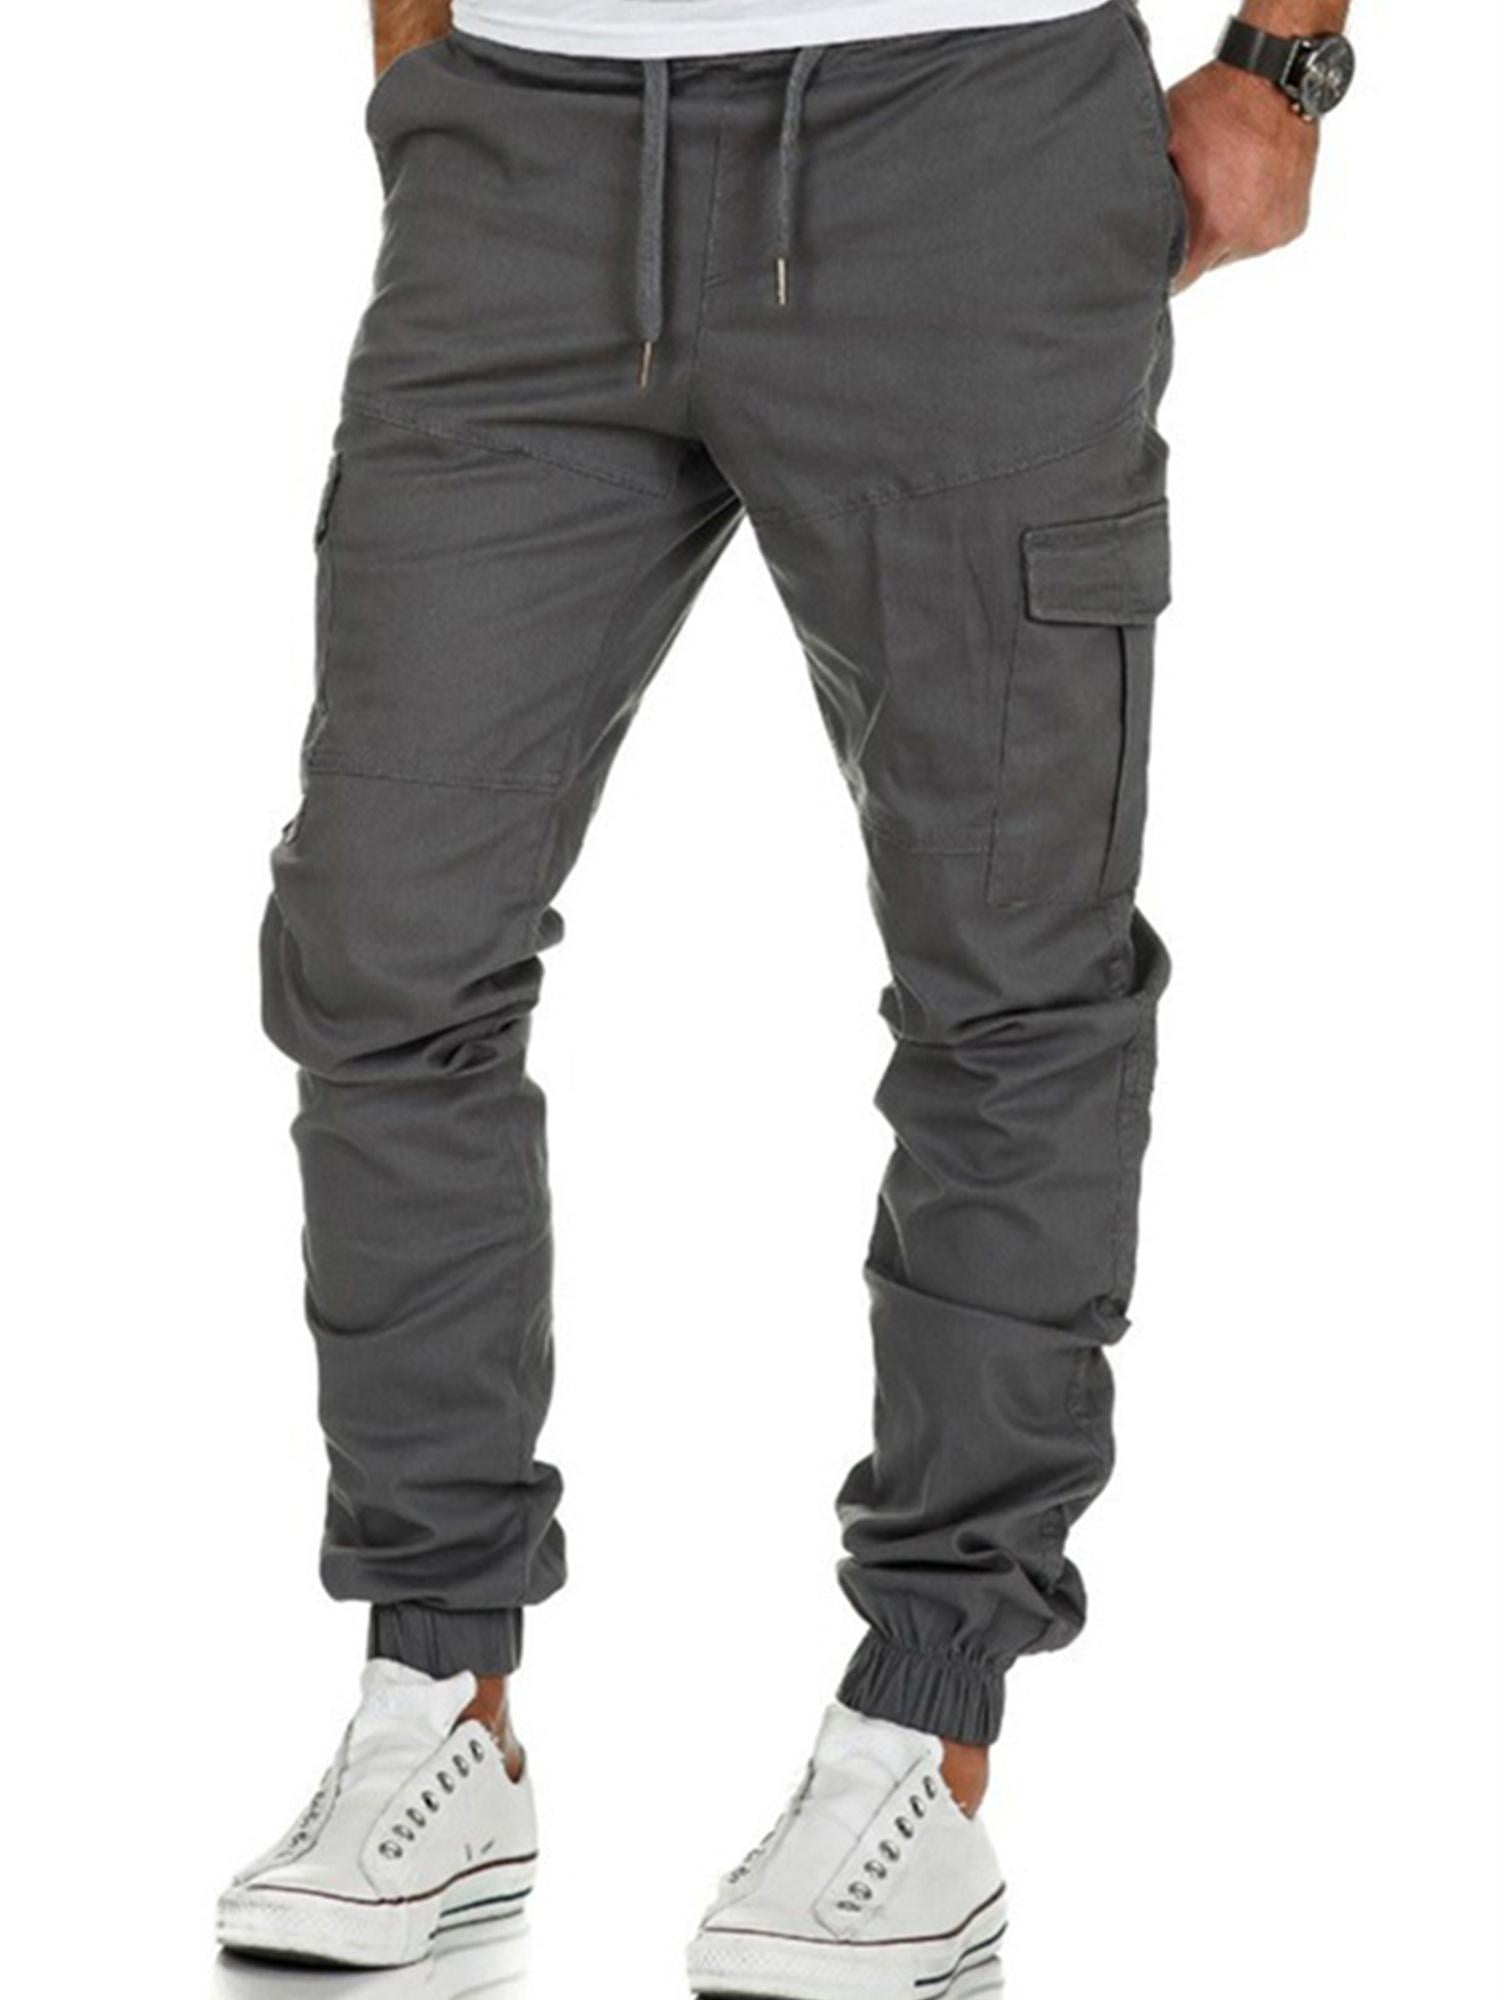 DYMADE Men's Slim Fit Casual Drawstring Solid Cargo Pants with Pocket ...